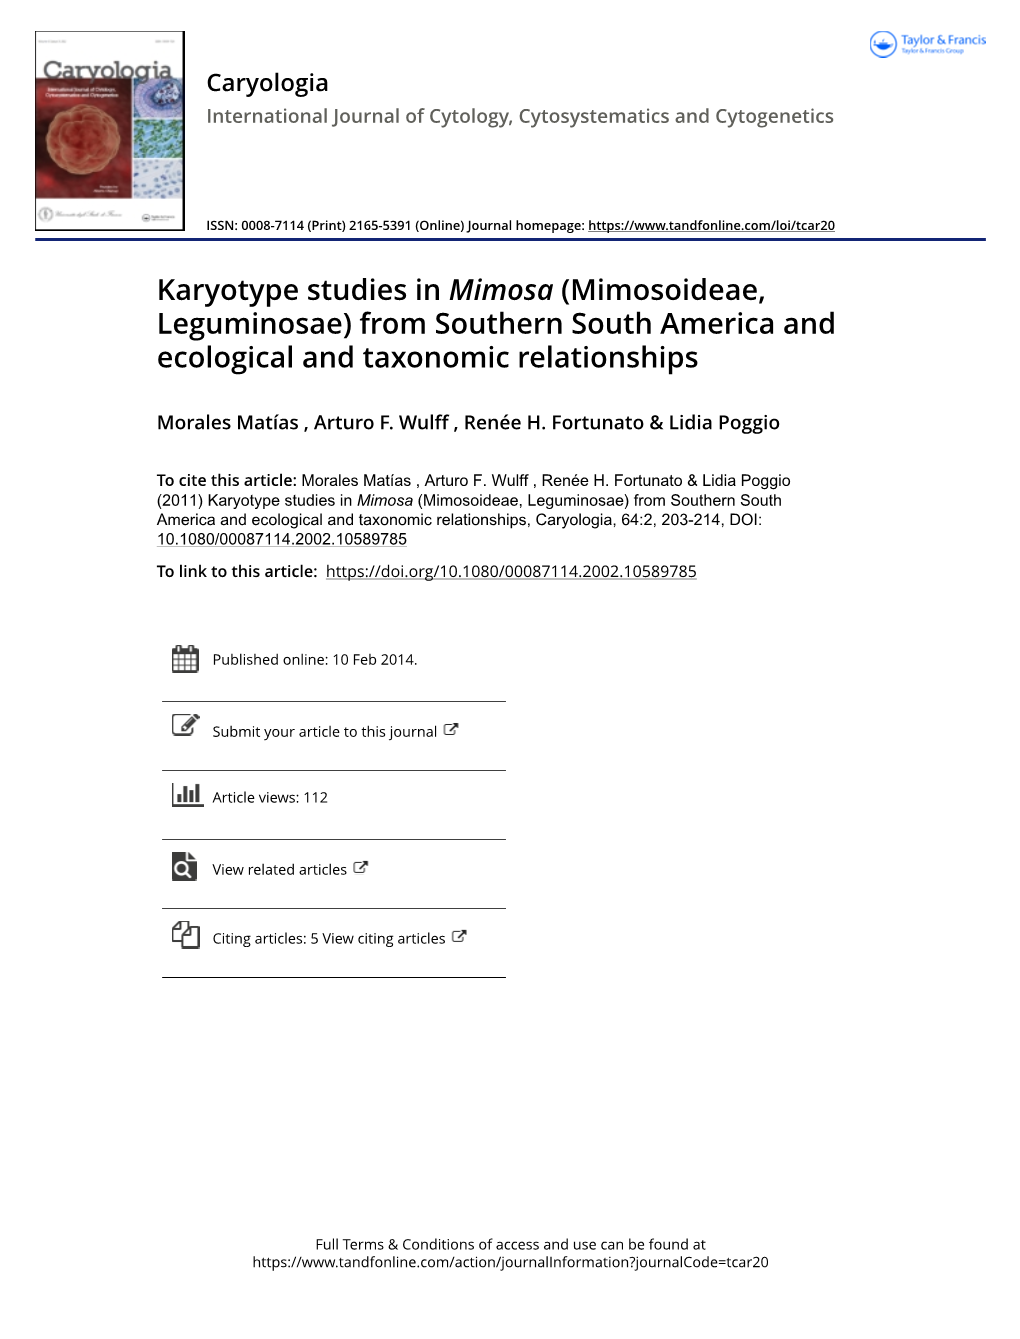 Karyotype Studies in Mimosa (Mimosoideae, Leguminosae) from Southern South America and Ecological and Taxonomic Relationships